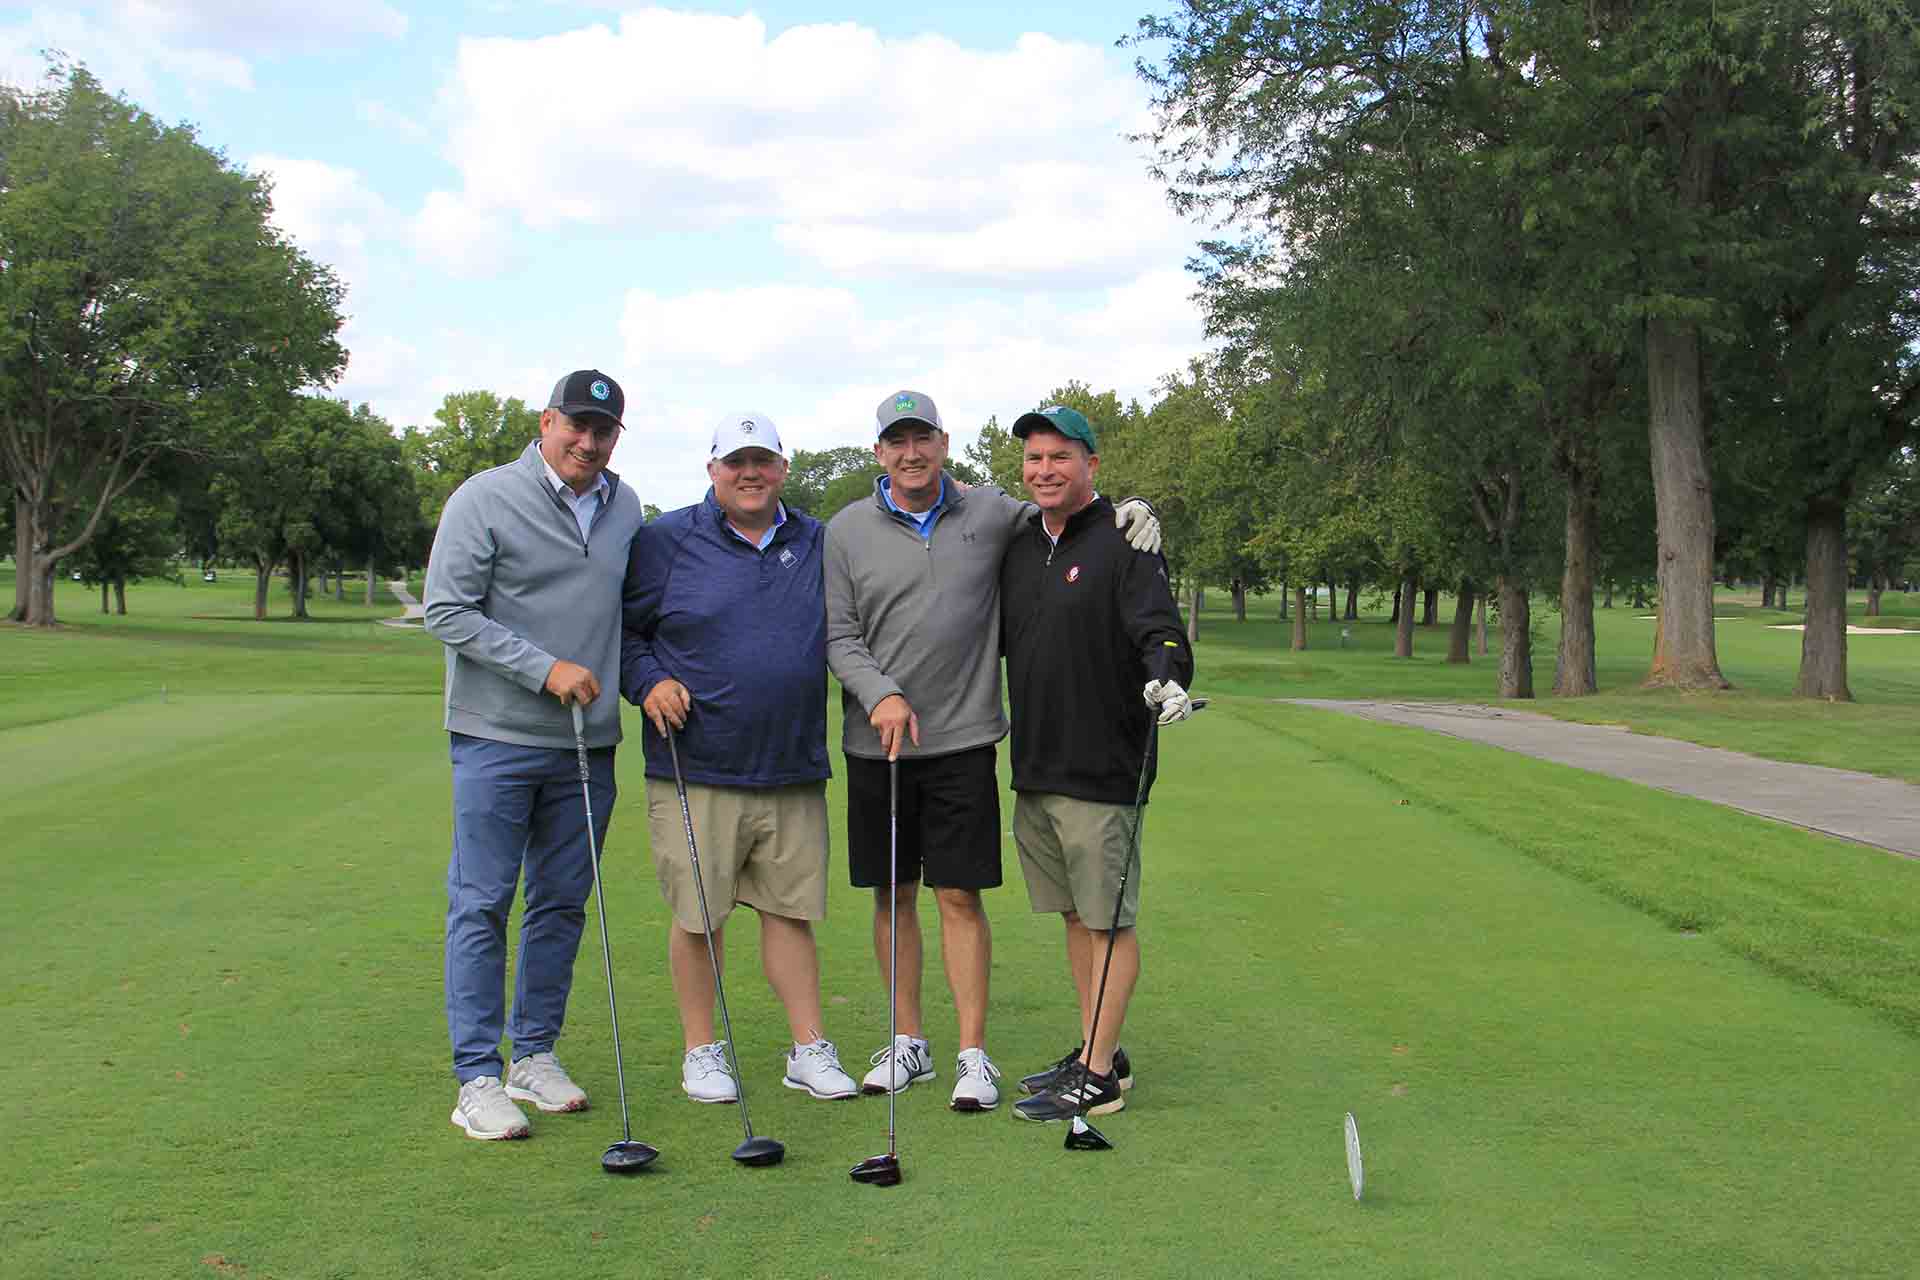 2022-Endowment-Golf-Classic-four-people-pose-on-golf-course-smiling